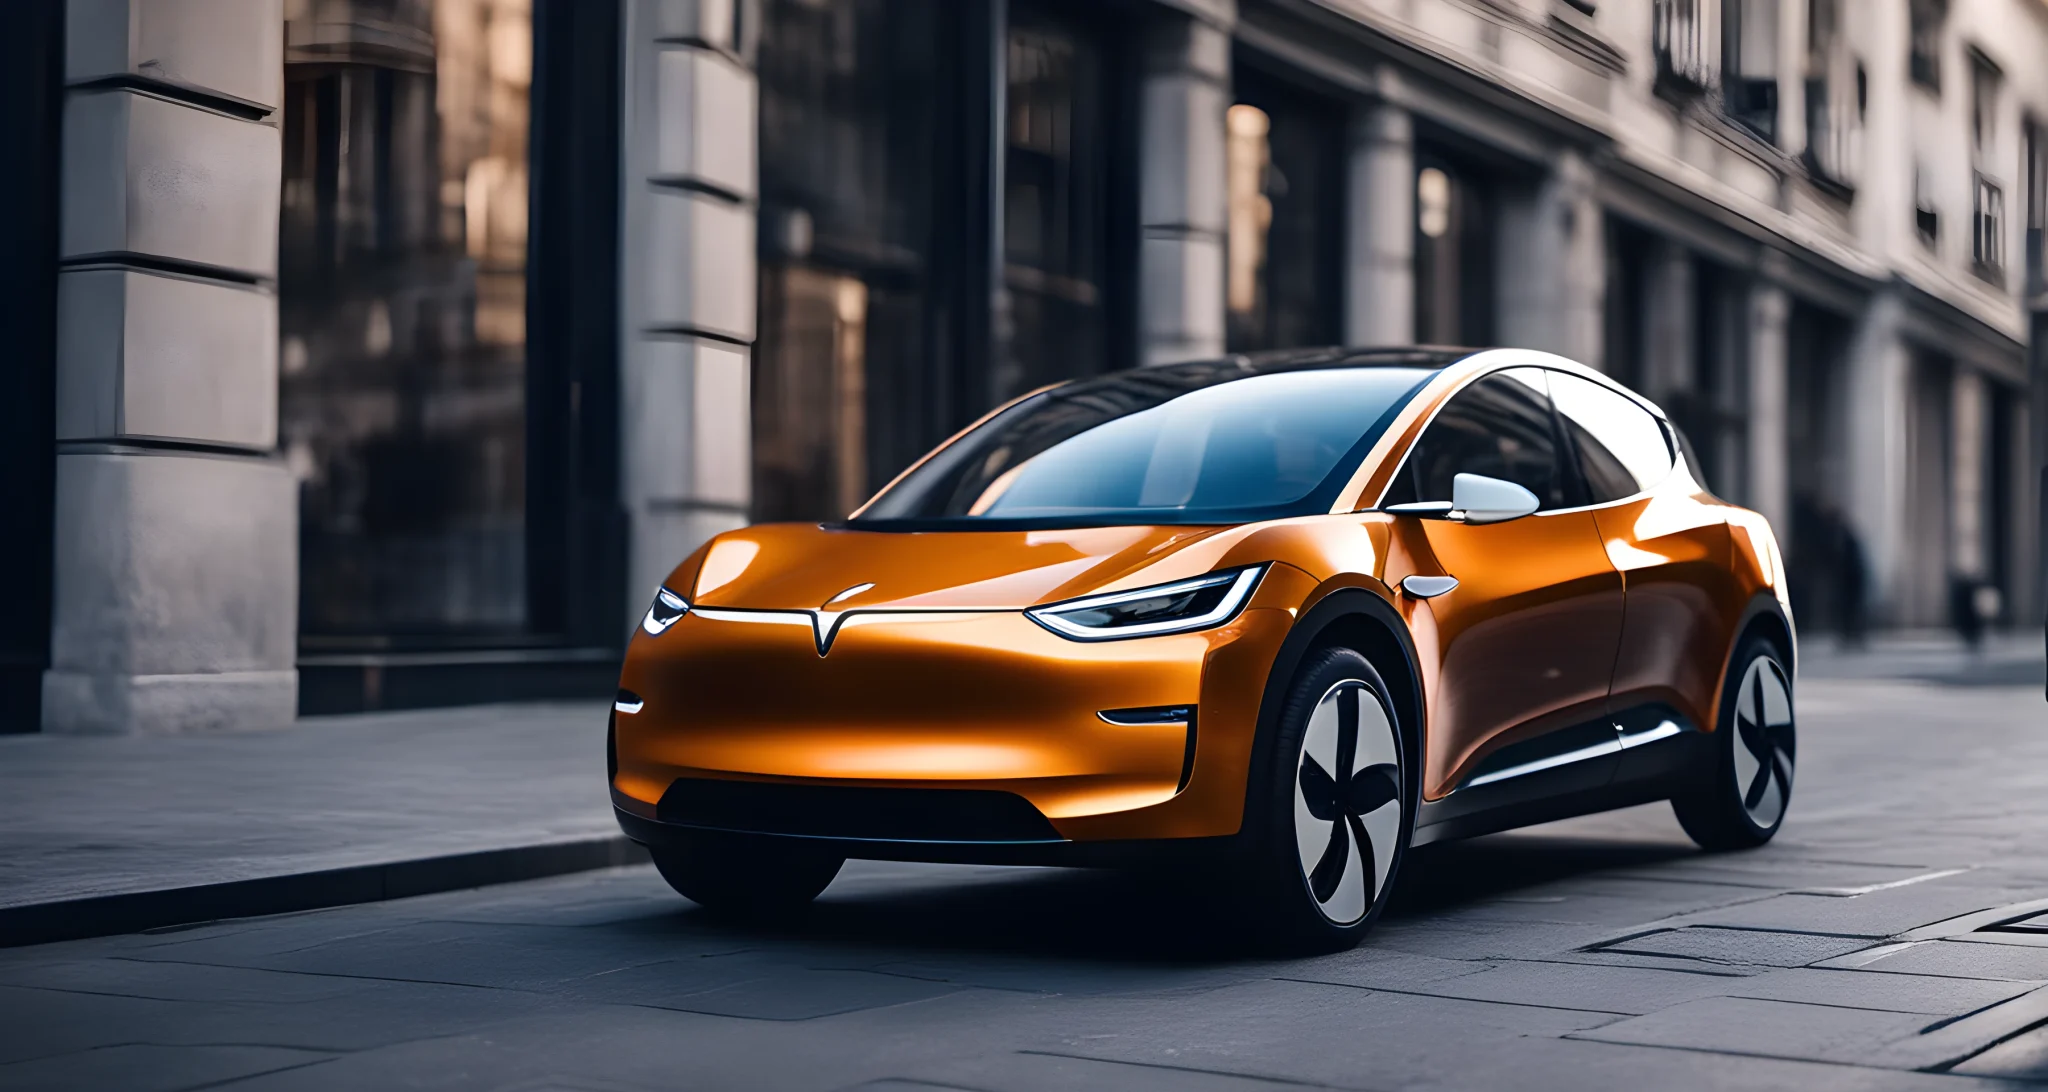 The image shows a sleek, modern electric car with a charging station in the background.